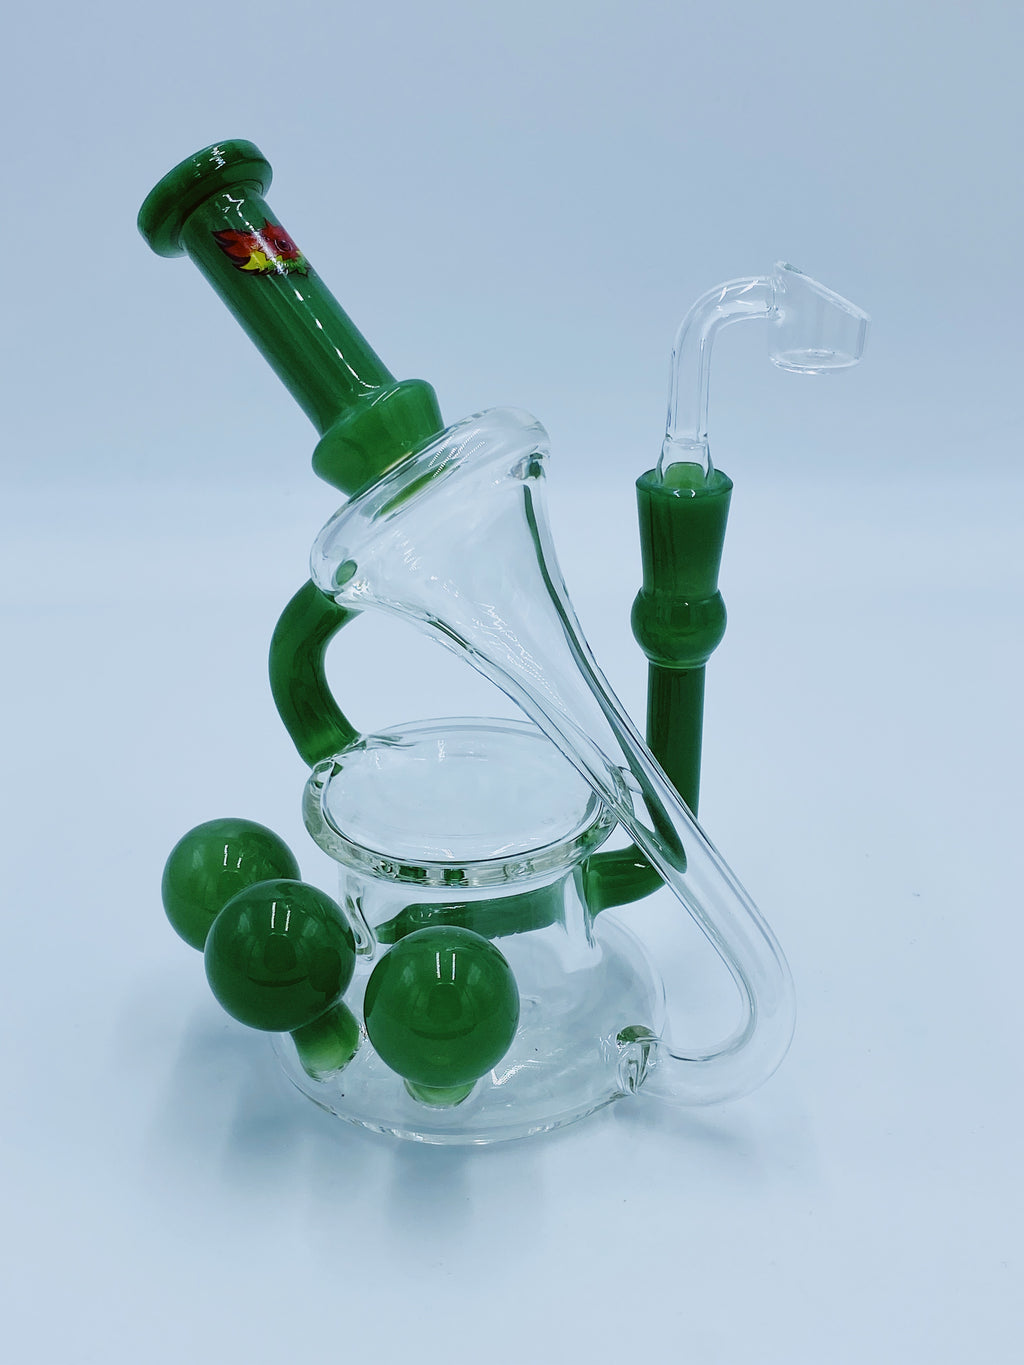 Red Eye Glass Cannon Recycler Rig rigs Red Eye Glass- Smoke Country - Land of the artistic glass blown bongs